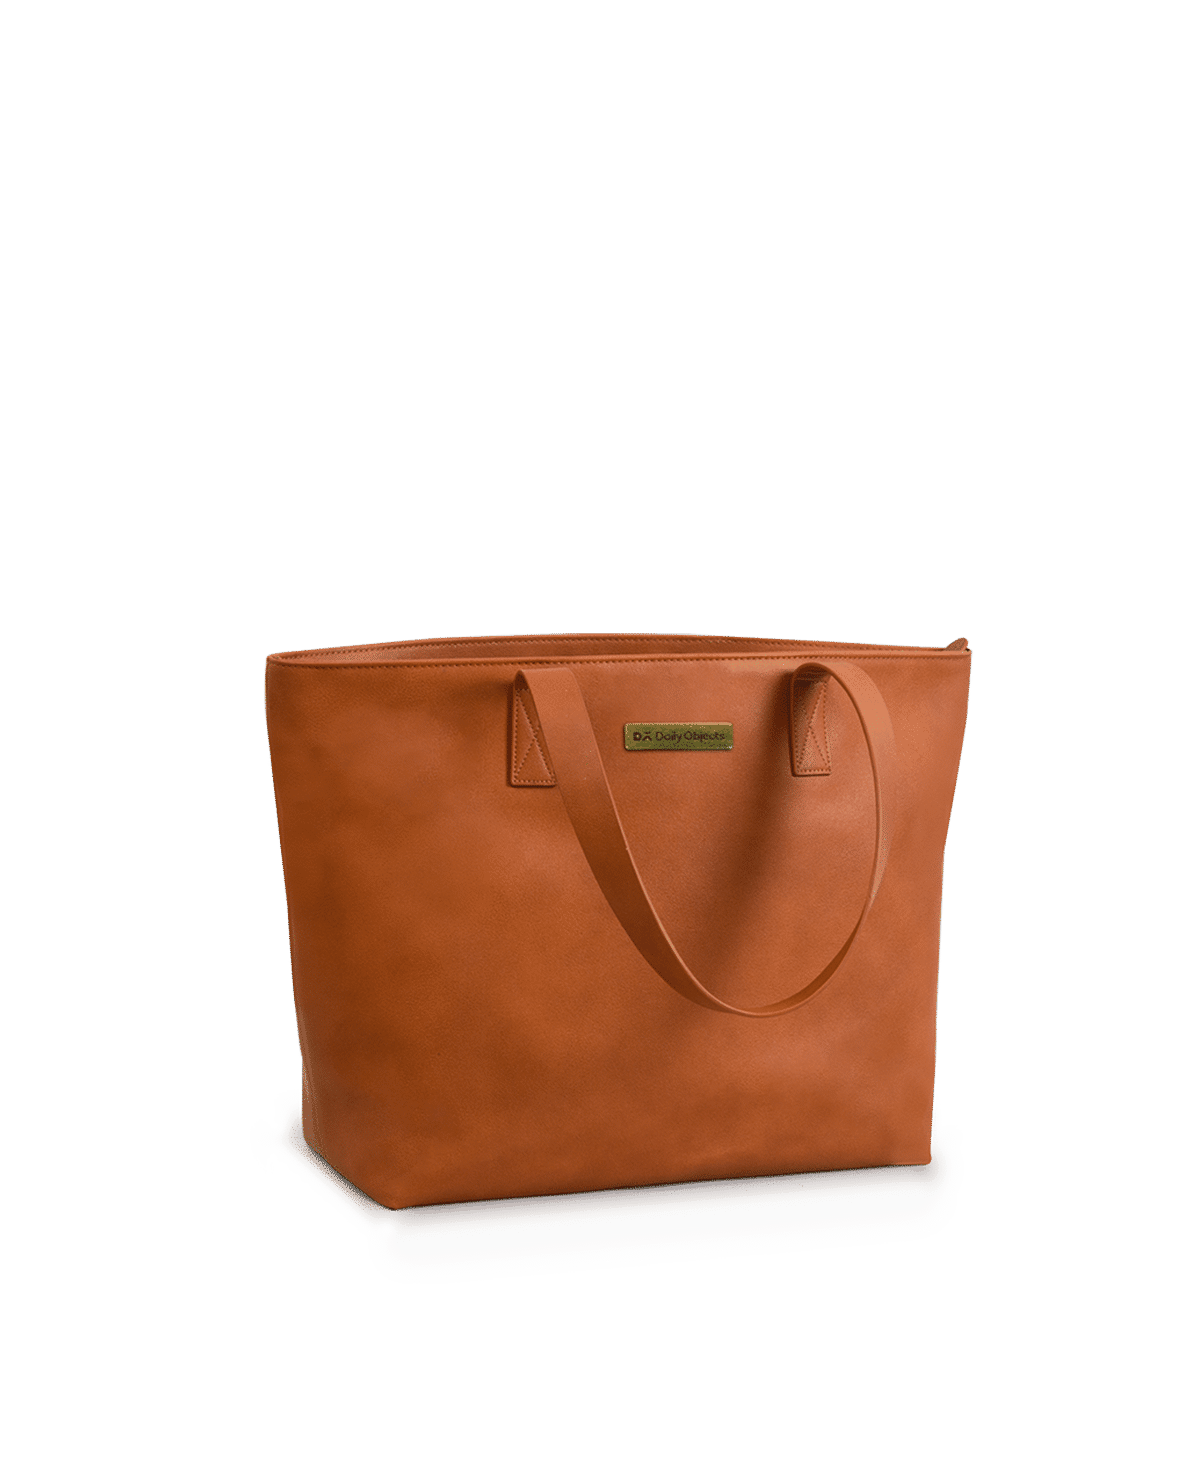 Albert Tusk  The Medium Tote  Leather Tote for Women